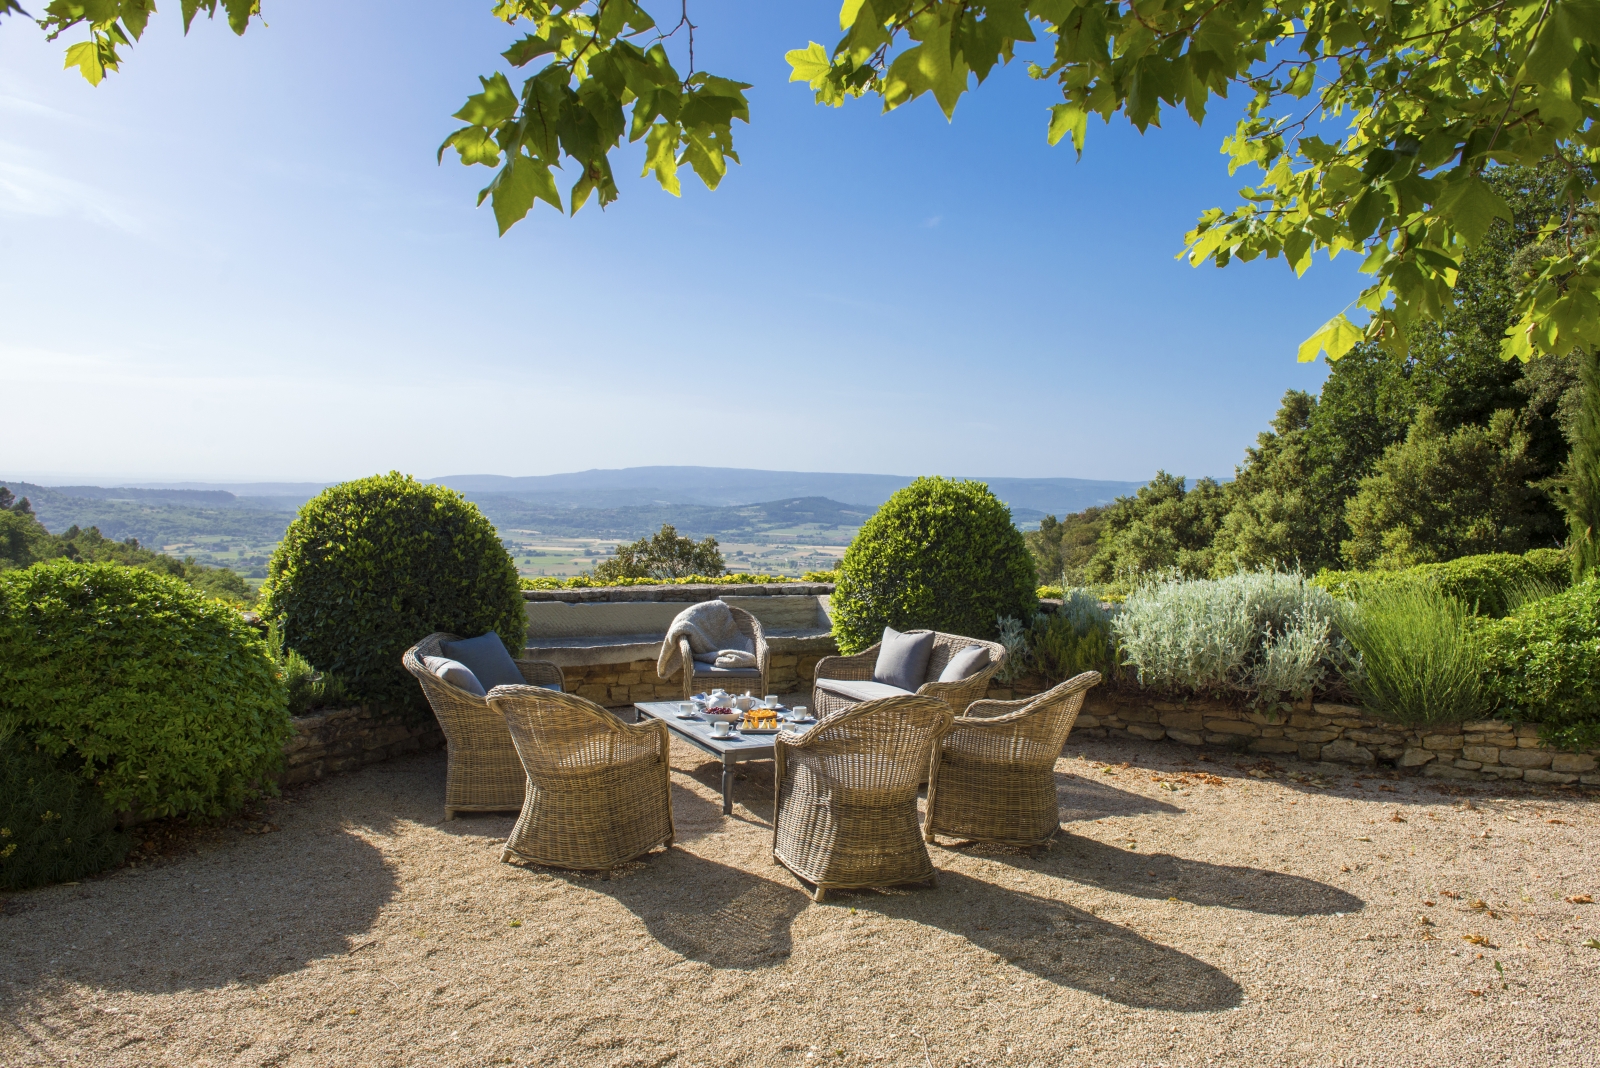 Lounge area with comfy chairs, coffee table and countryside view at Bastide de la Paix in Provence, France